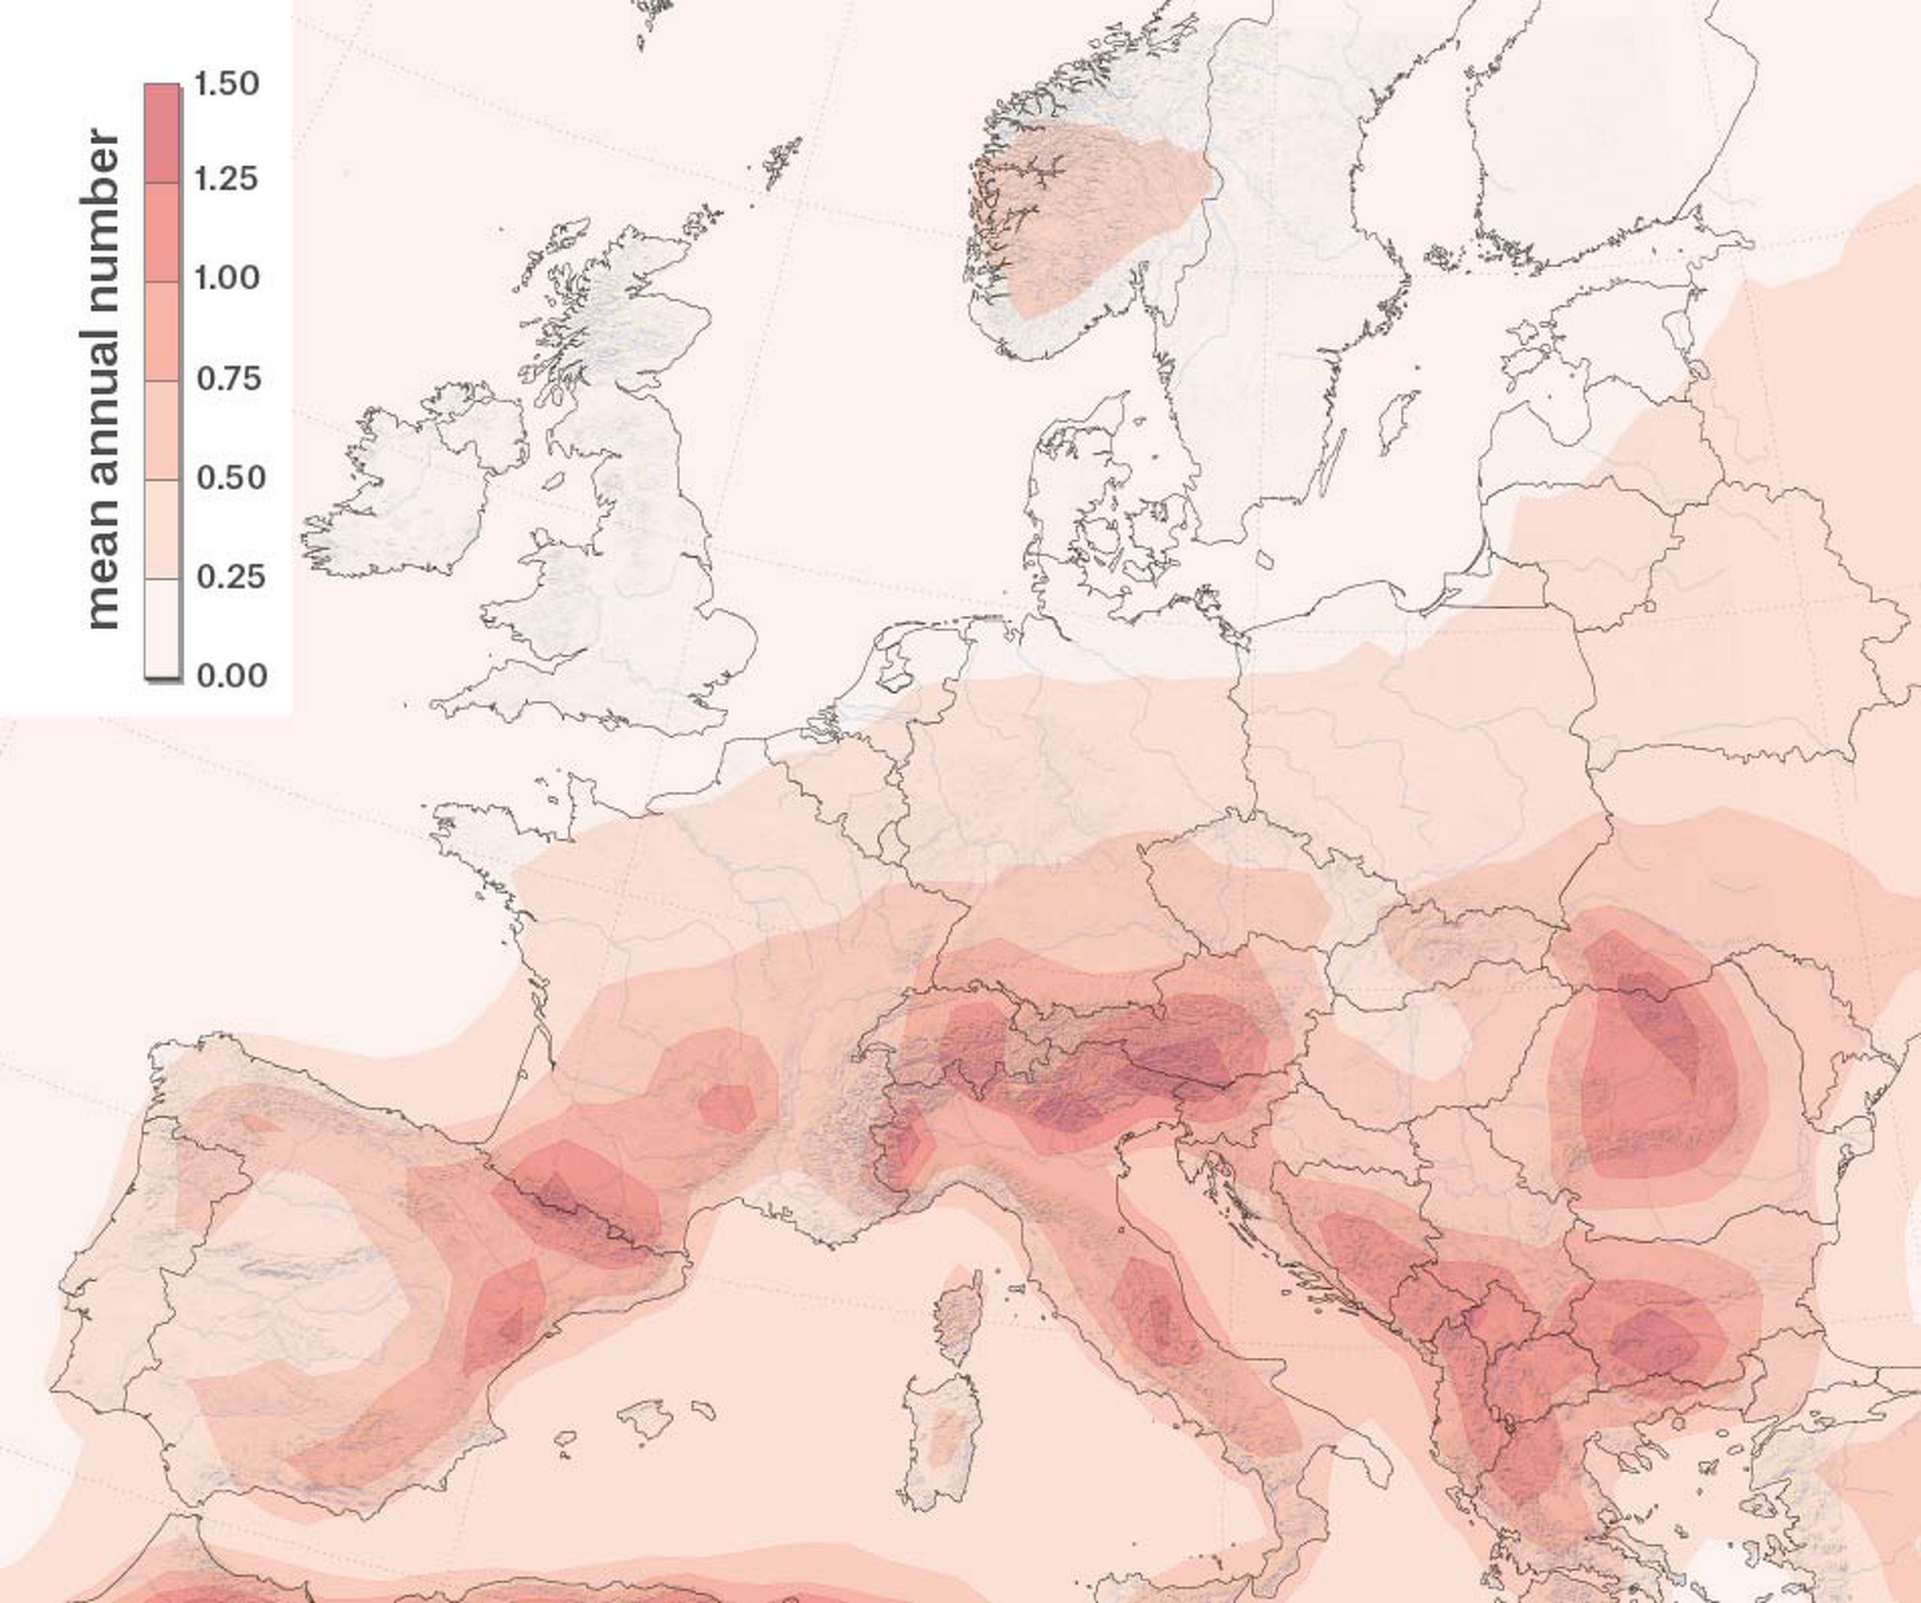 Most frequent hail events in Europe occur in northern Italy, Romania, in the Pyrenees and in the Balkans